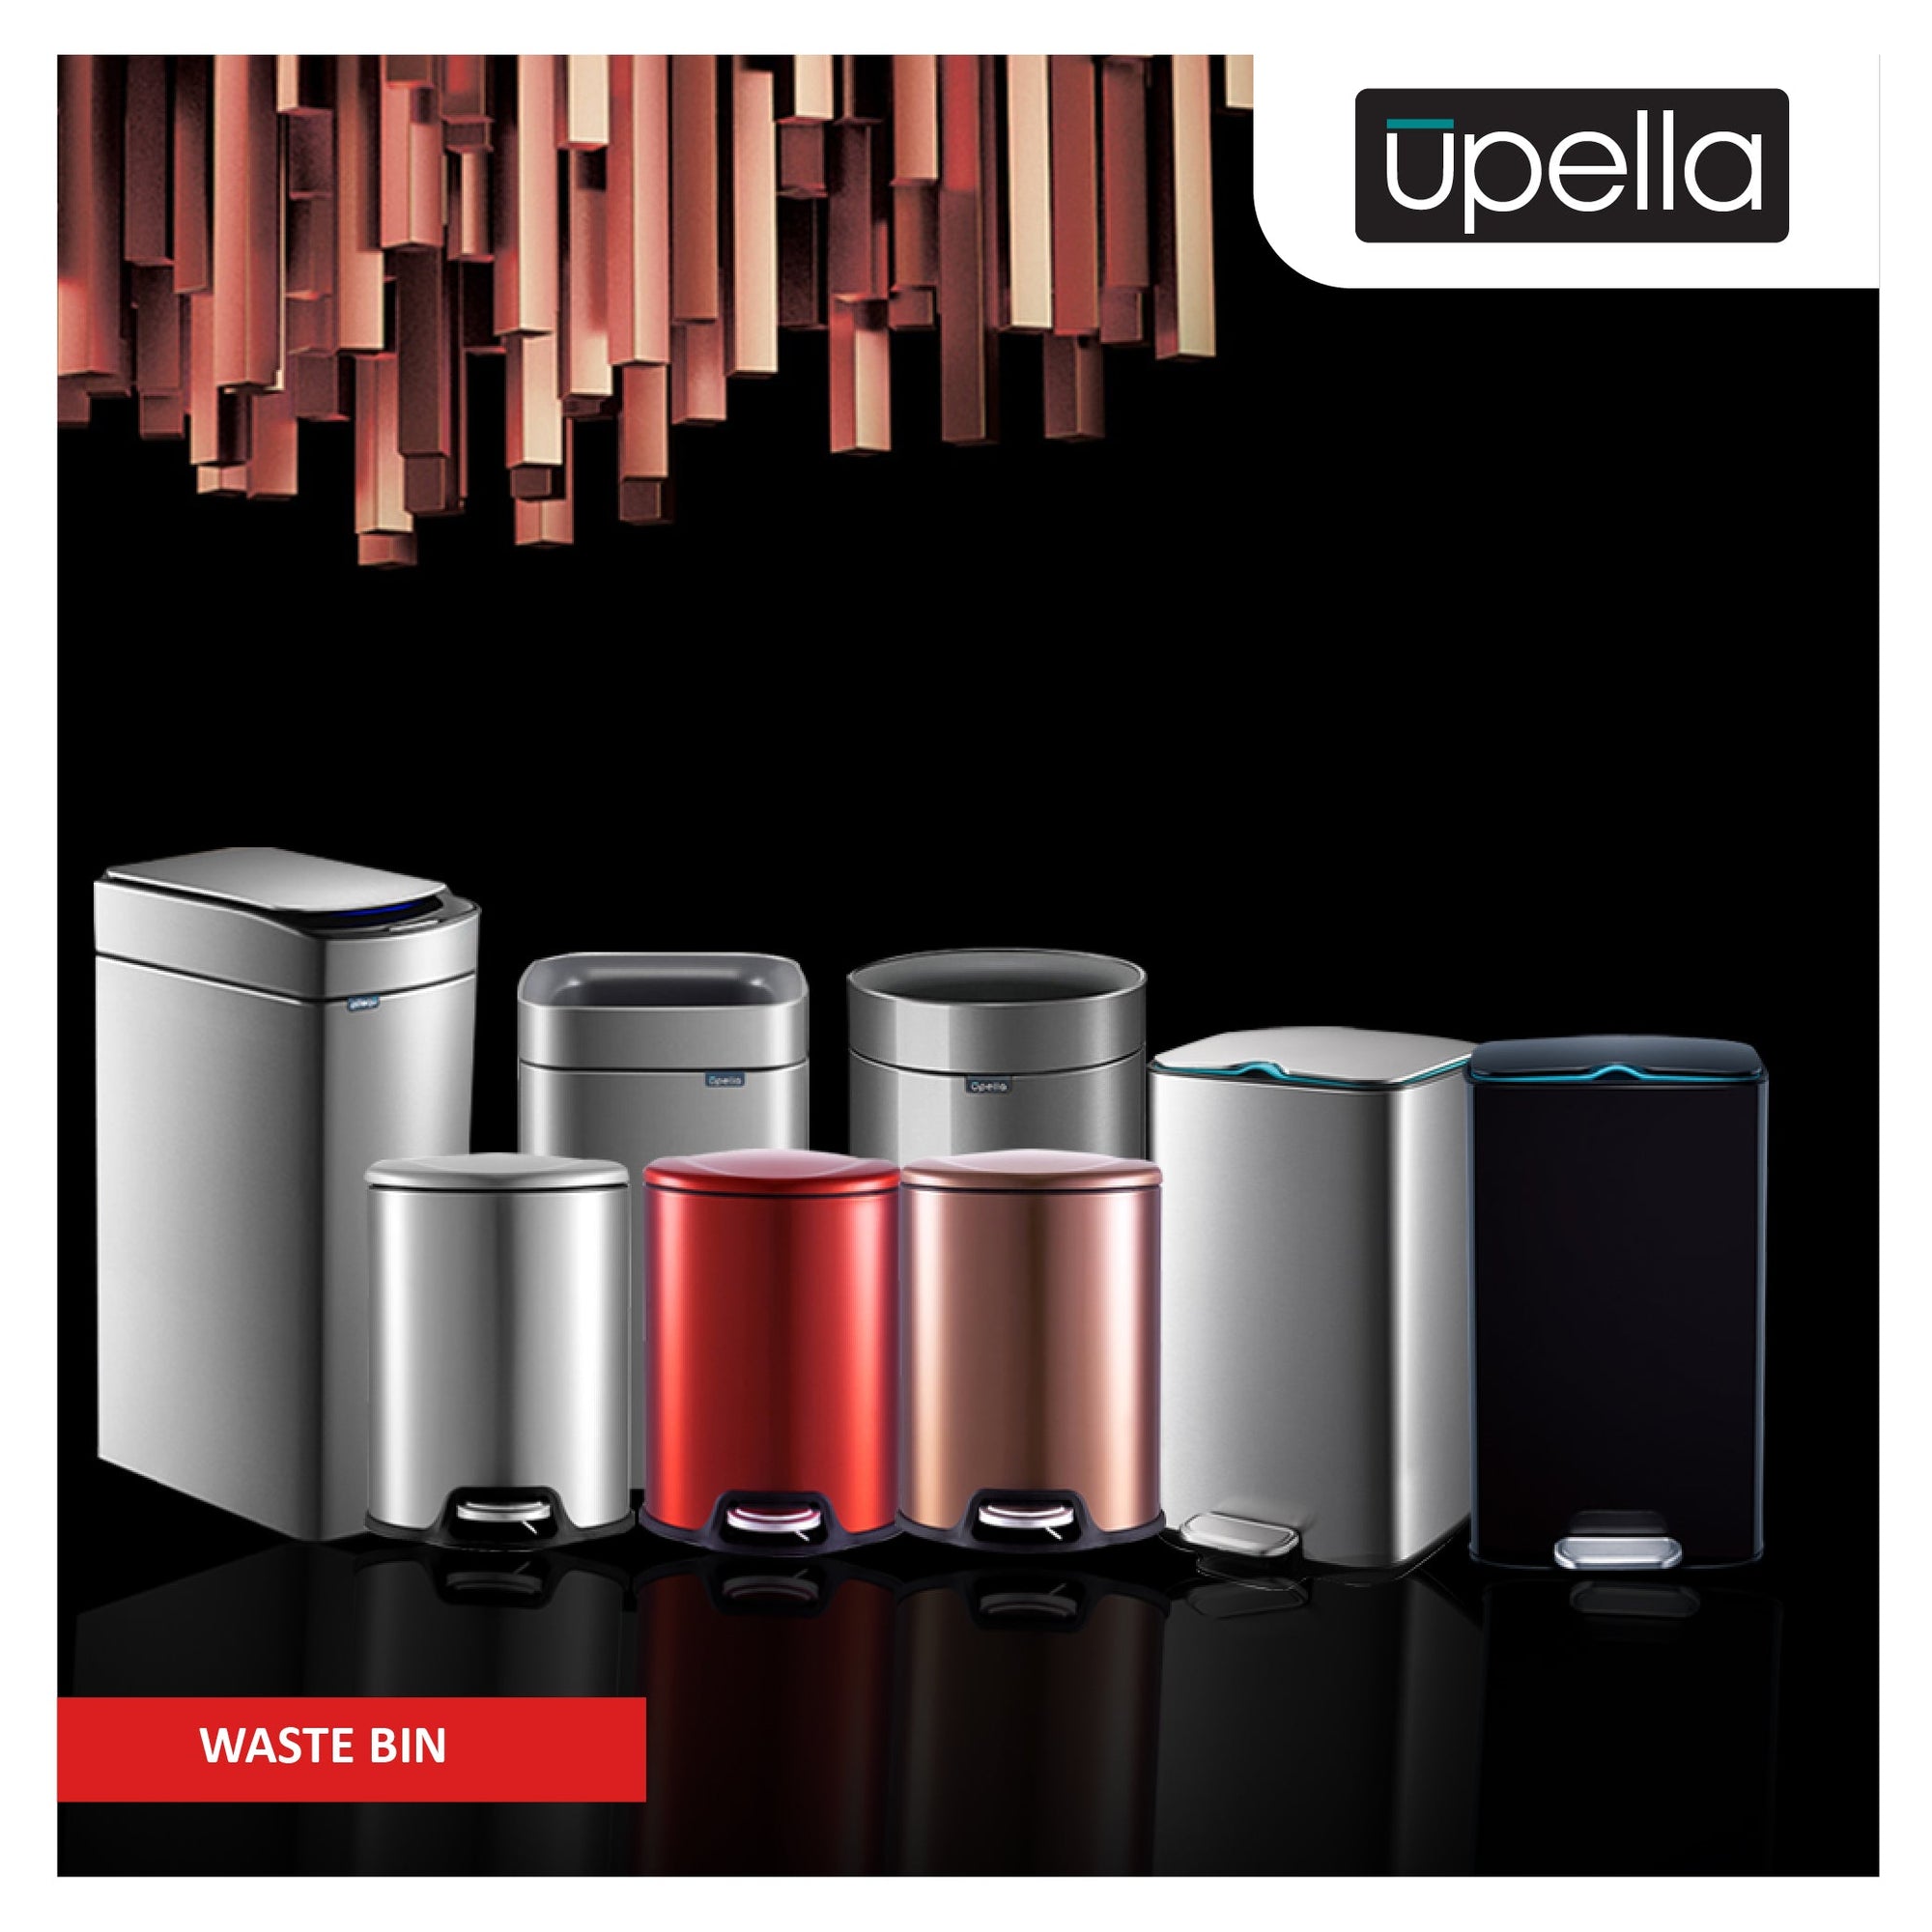 Upella Waste Bins - Image of a modern waste bin with a sleek design and durable construction.